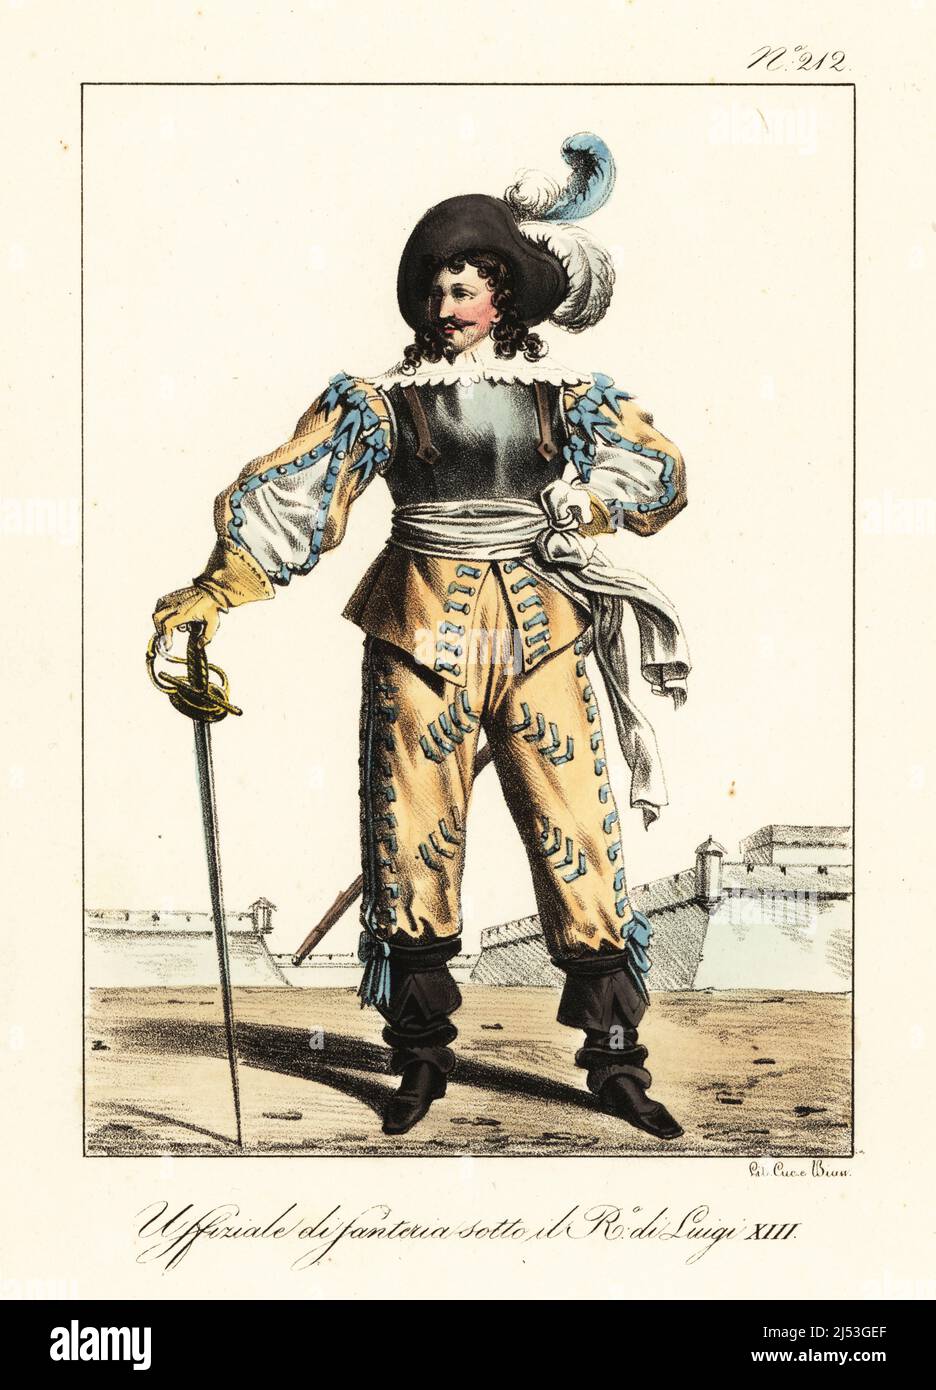 French infantry officer in the reign of King Louis XIII. Plumed cap,  breastplate, lace collar, doublet with slashed sleeves, pantalons, cavalier  boots, sword. Officier d'infanterie sous le Regne de Louis XIII.  Handcoloured